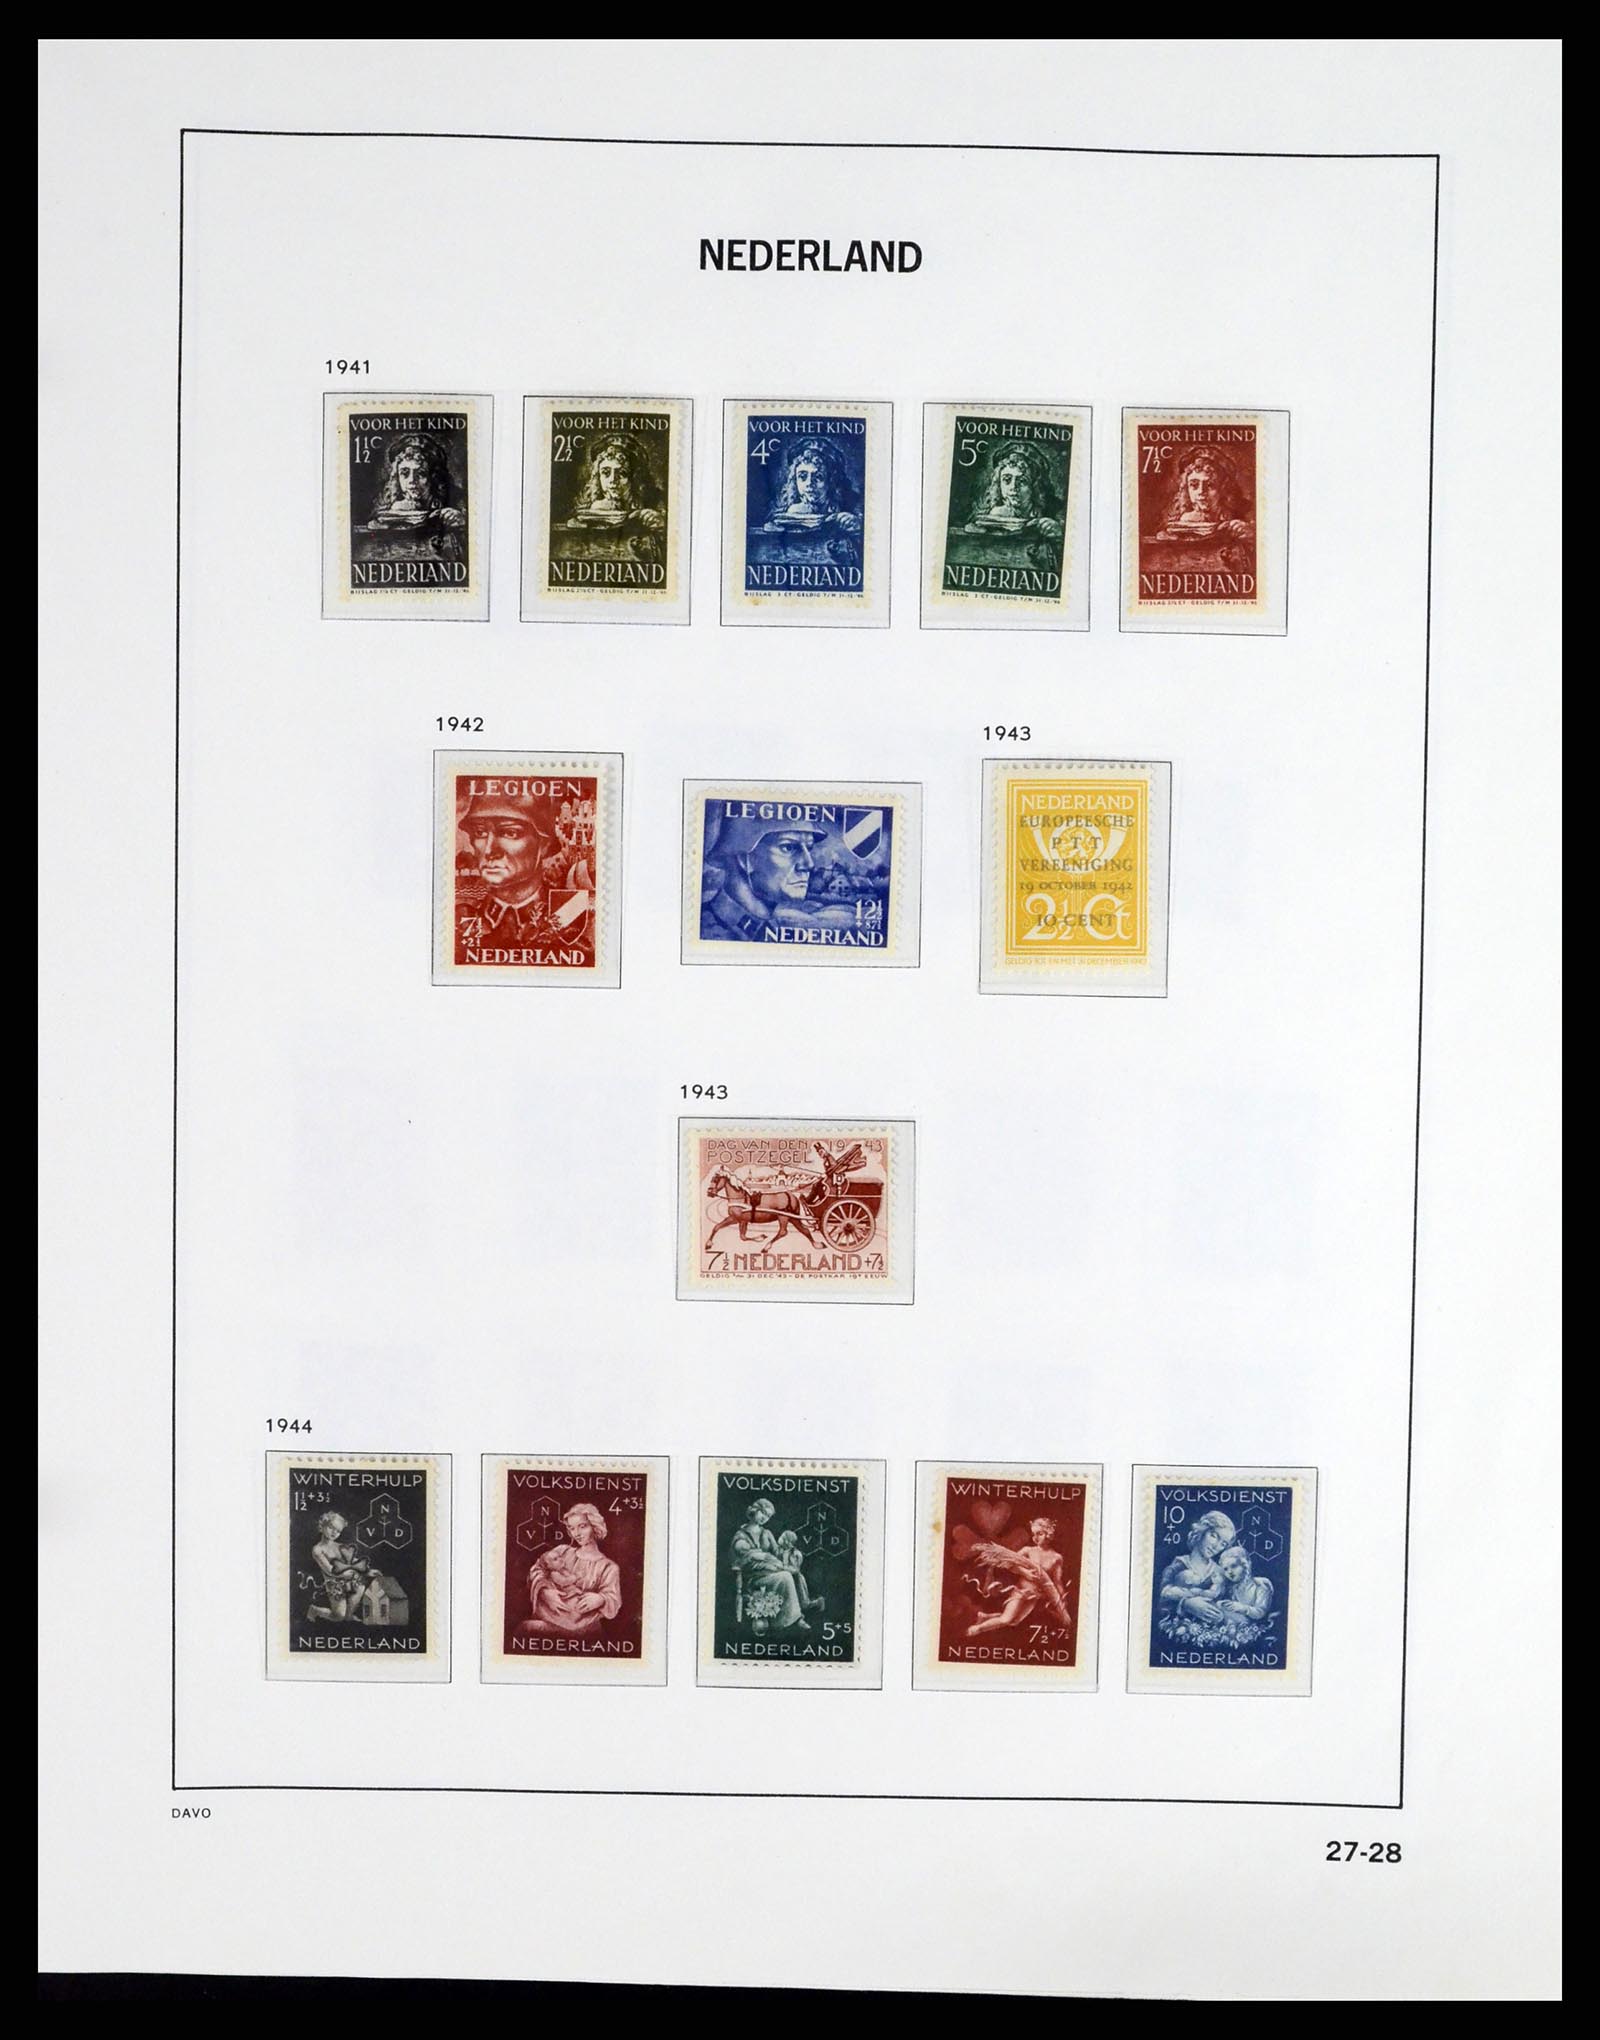 37294 027 - Stamp collection 37294 Netherlands 1852-2001.